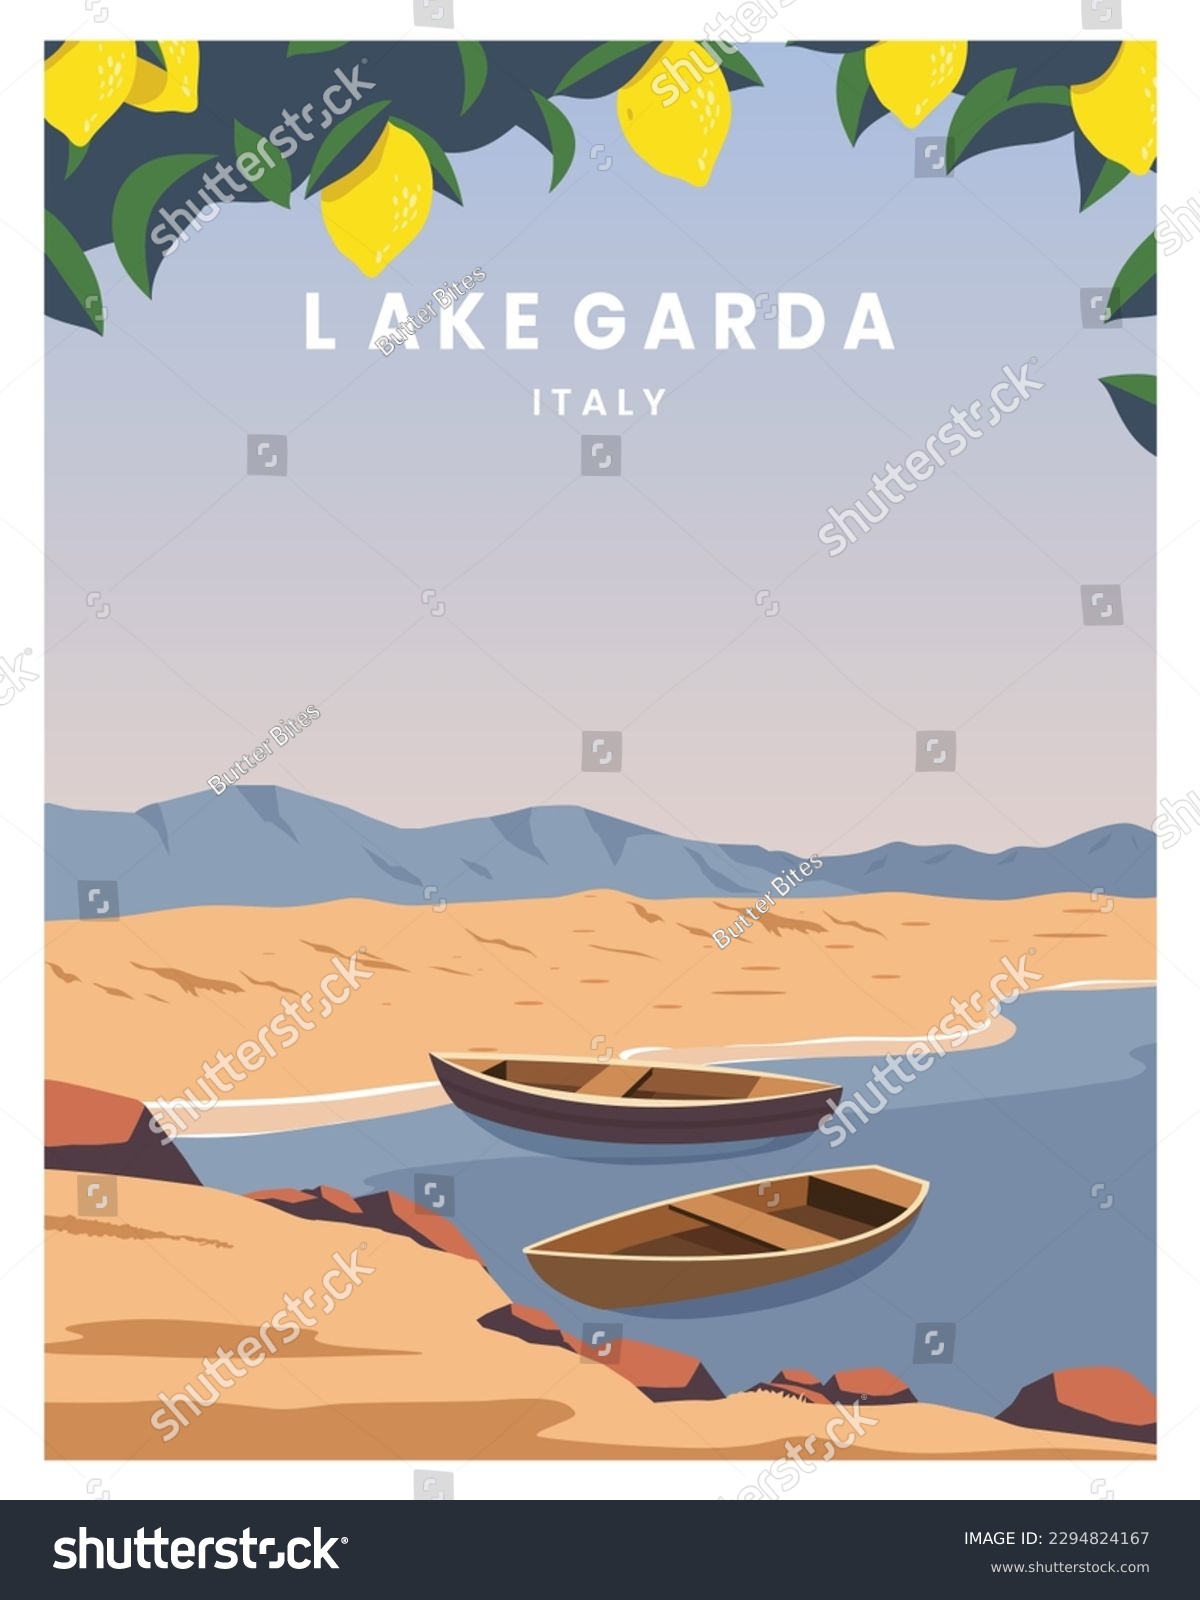 SVG of beautiful Panorama of the Lake Garda in Italy. vector illustration landscape for background, travel poster, card, postcard, print. svg